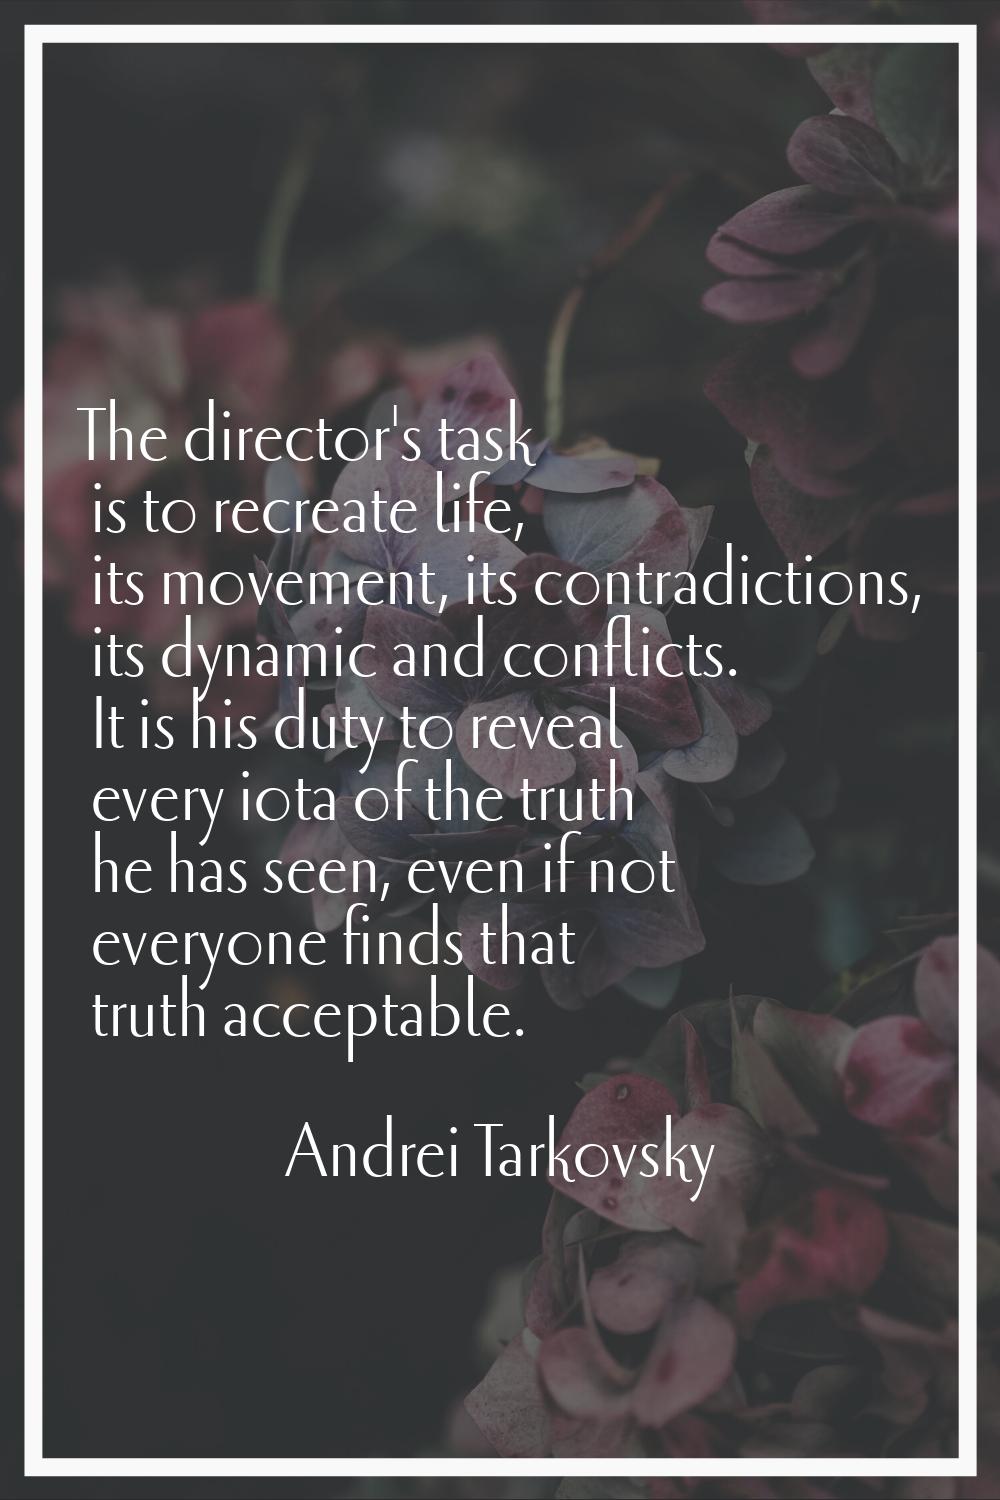 The director's task is to recreate life, its movement, its contradictions, its dynamic and conflict